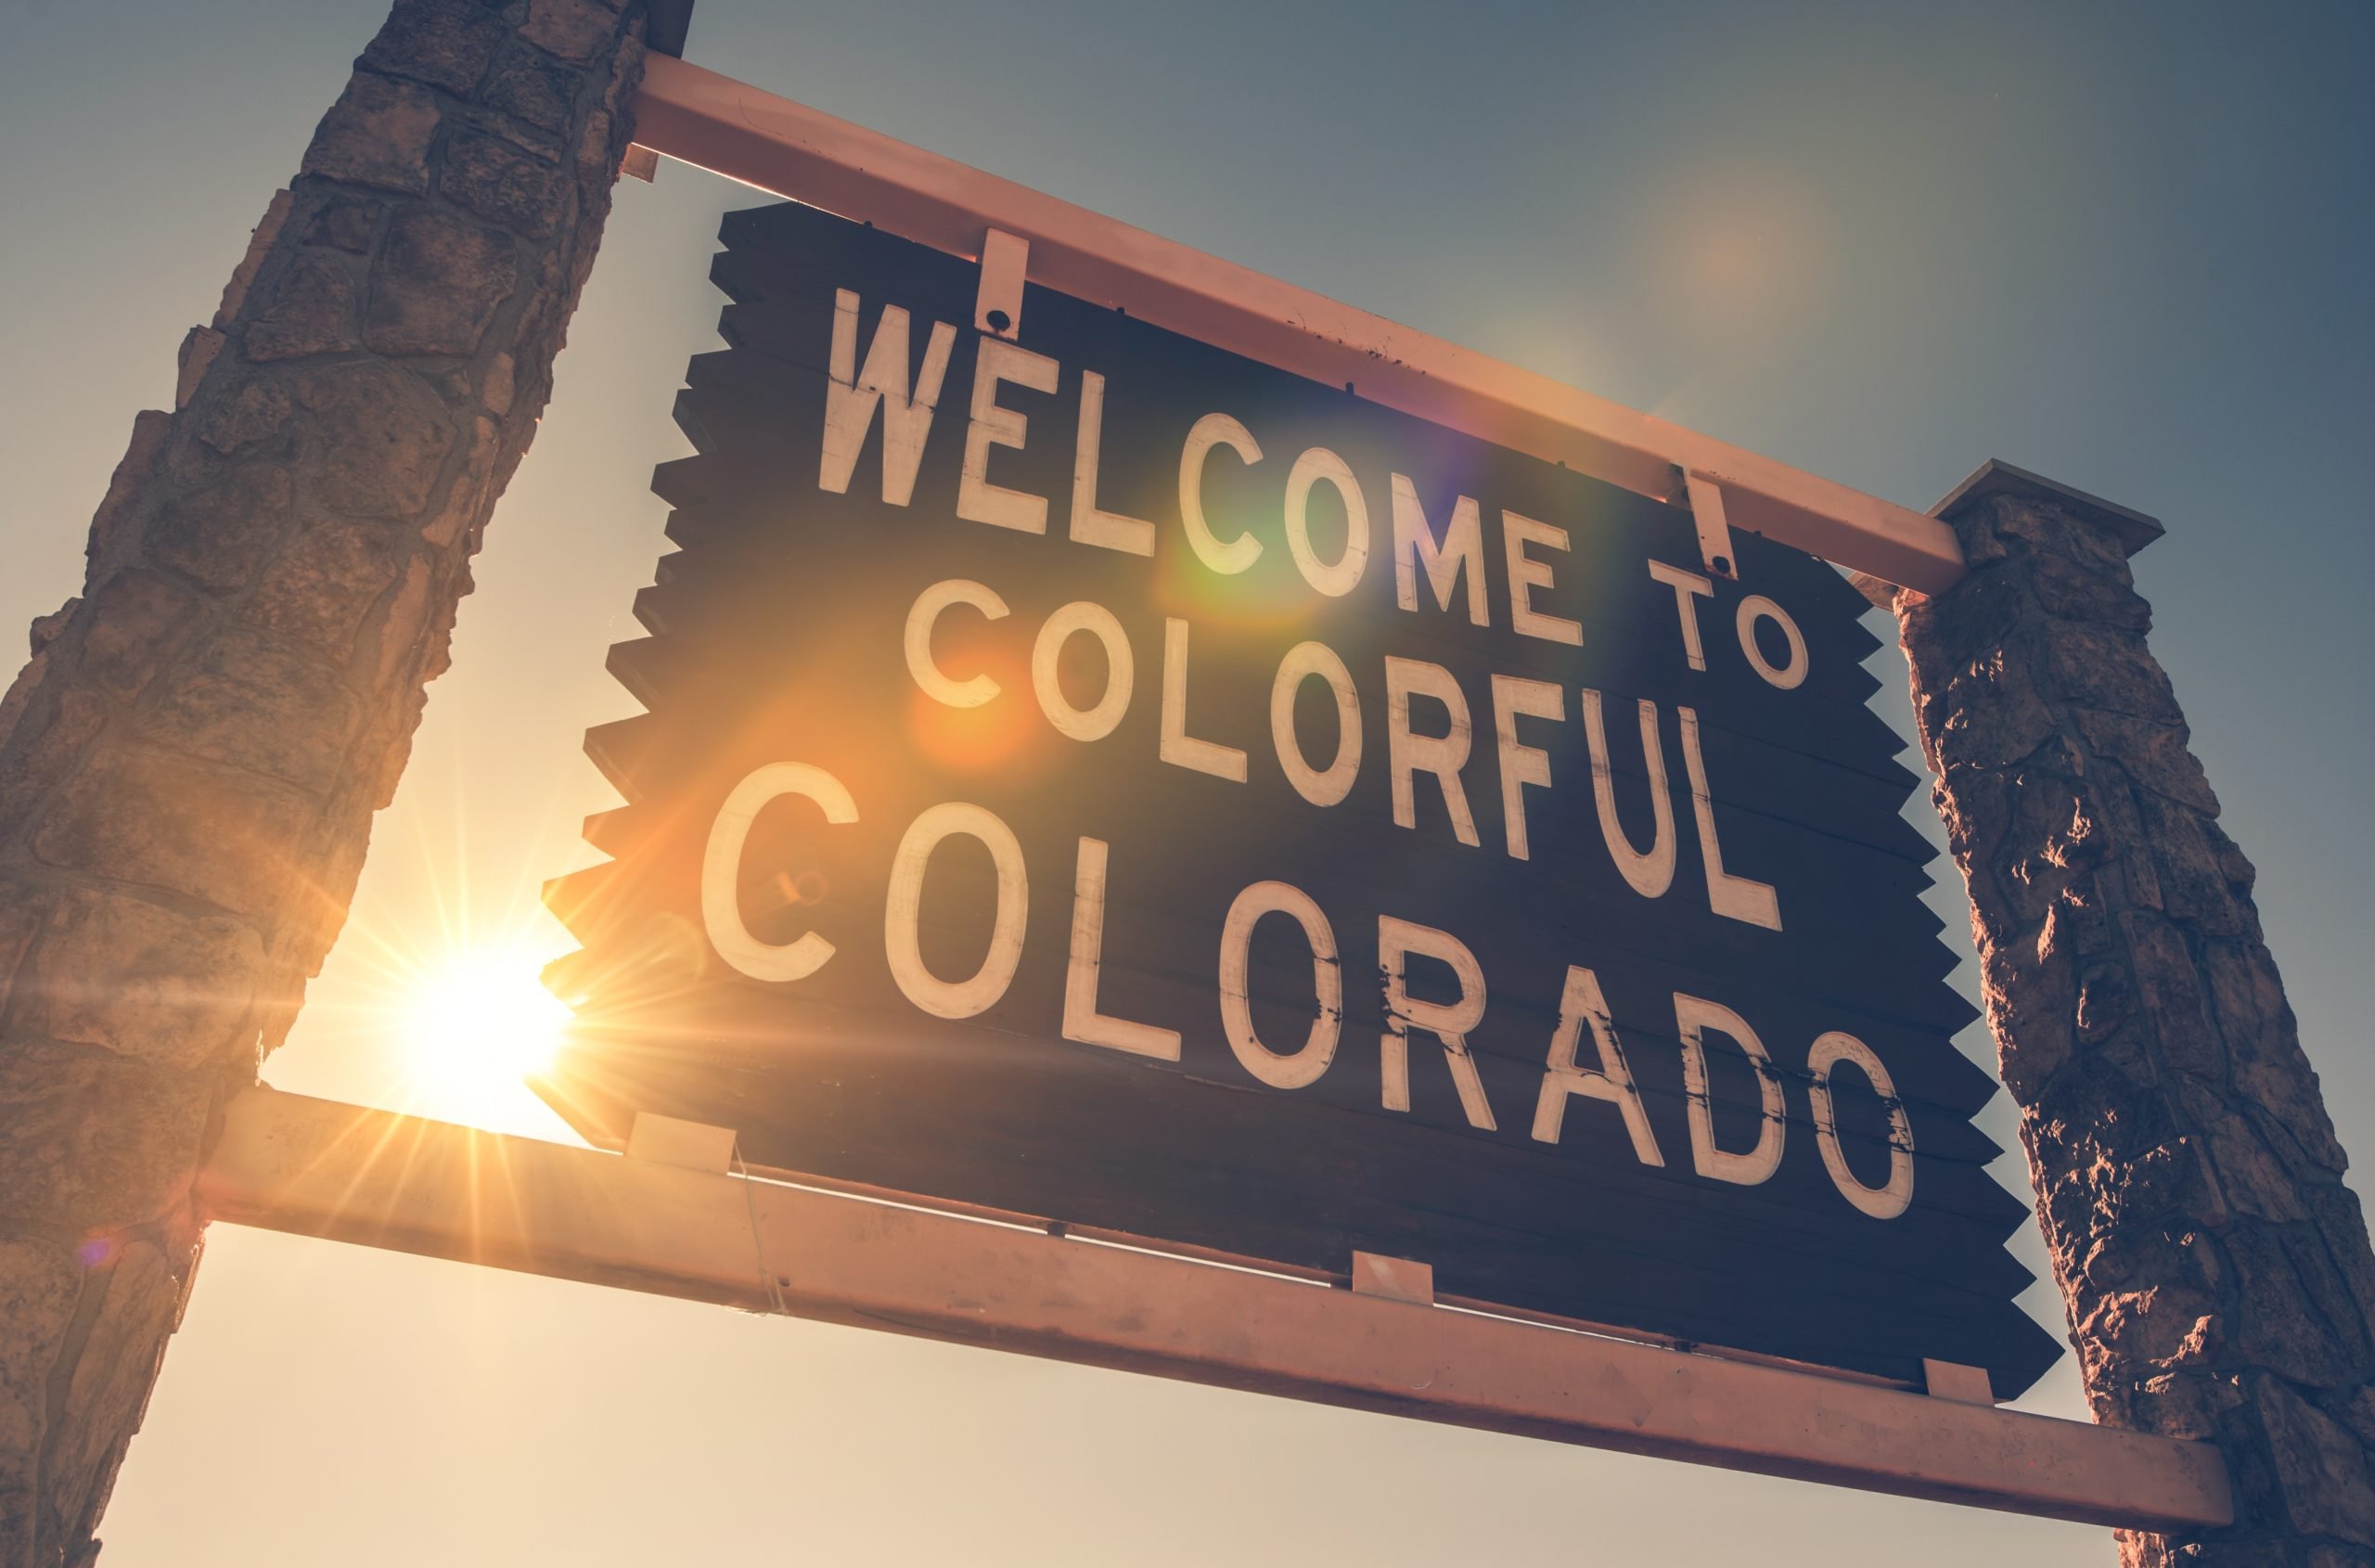 Welcome to the Colorado sign